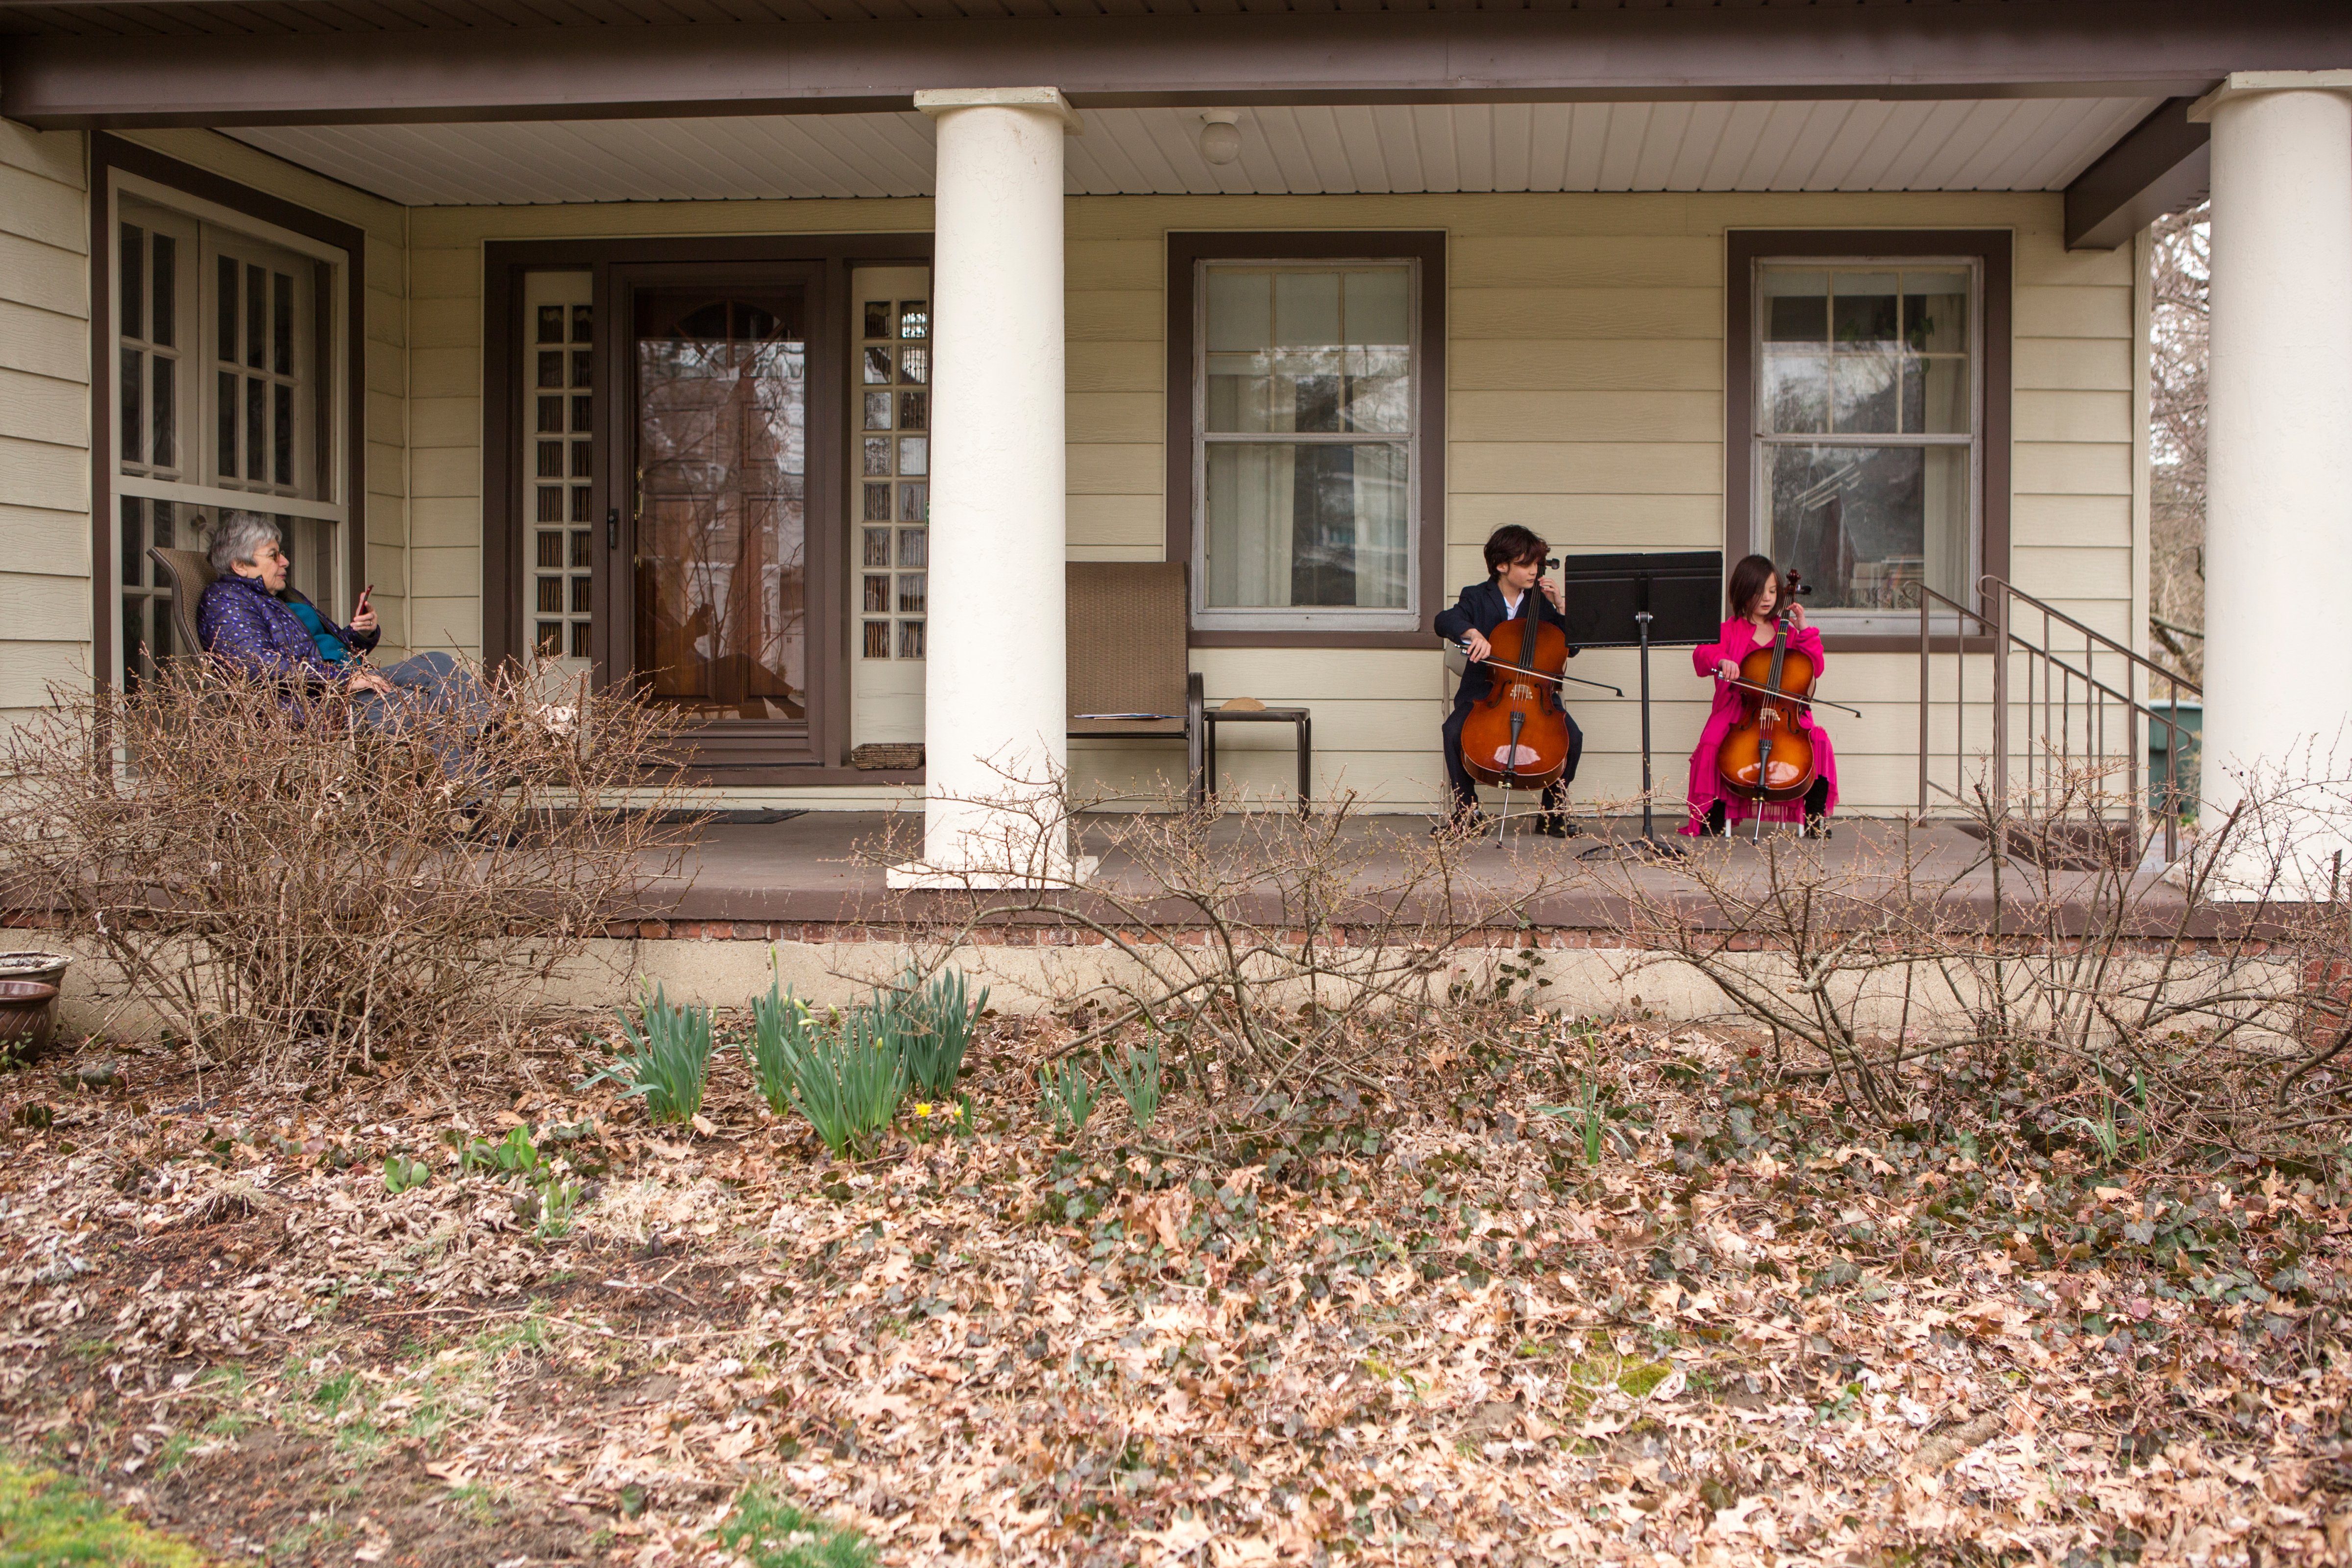 Two Kids Played Cello for Their Self-Isolated Neighbor